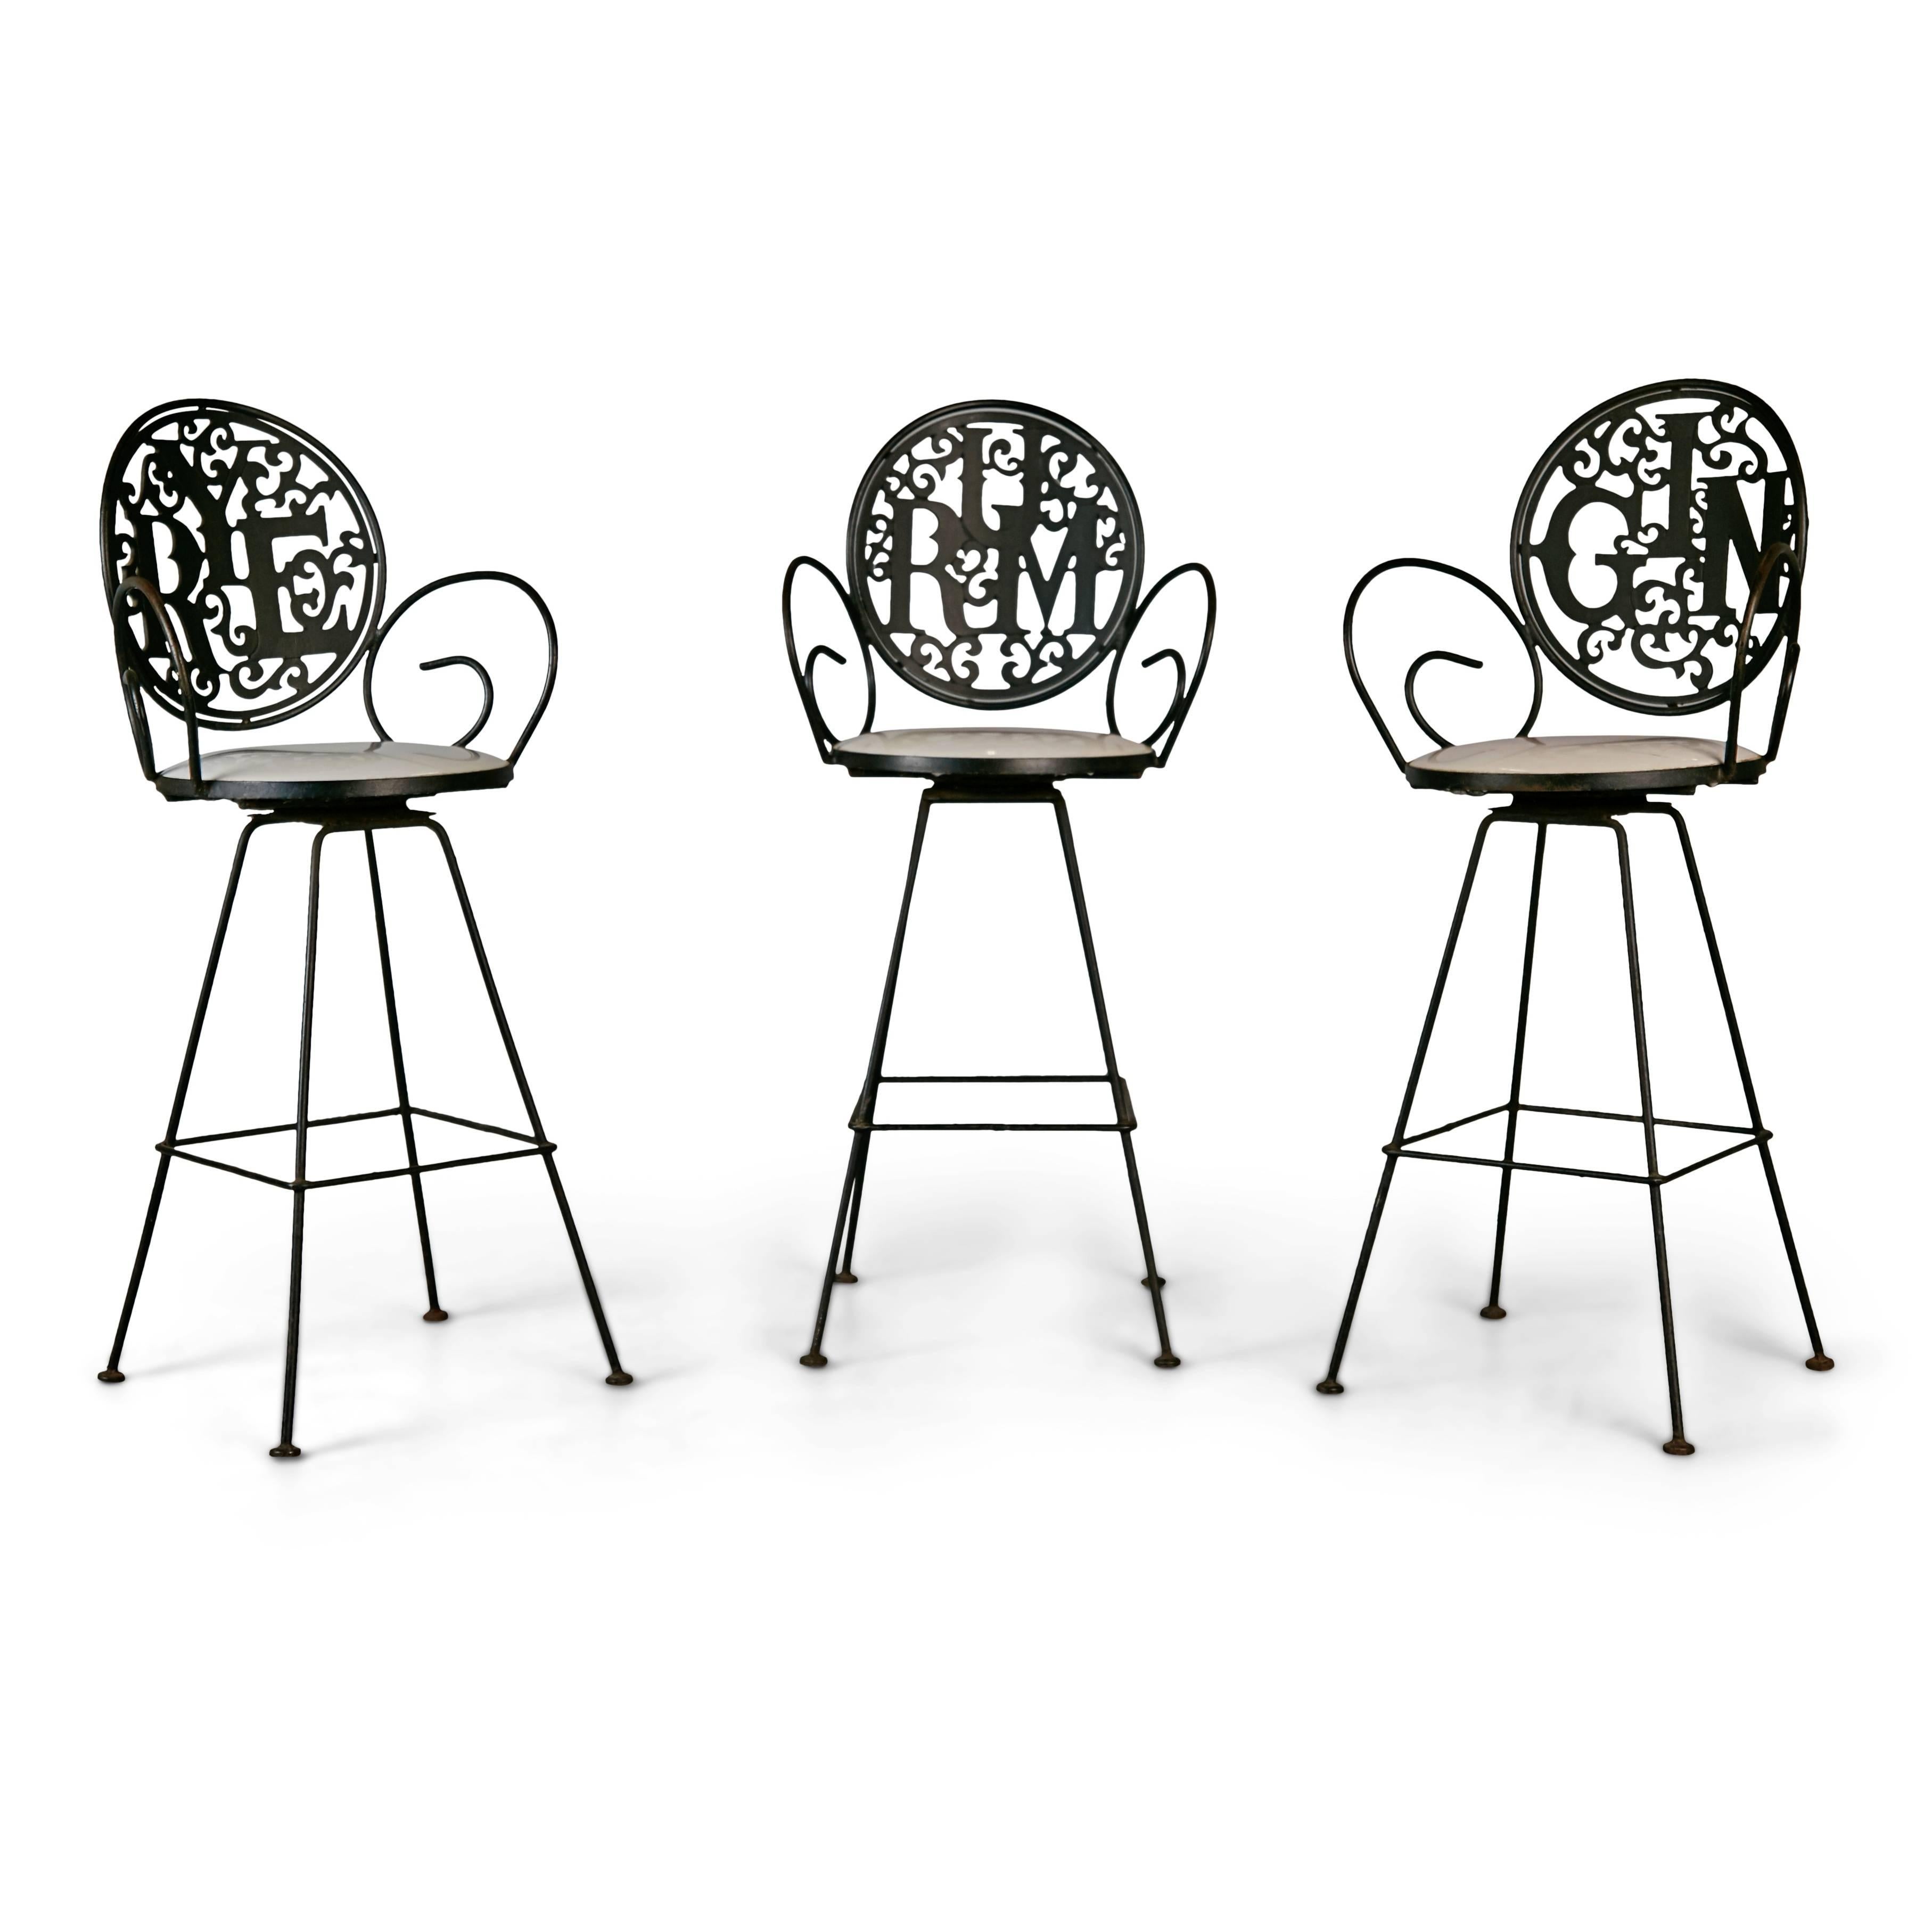 Pick your poison and then pick your seat, perching on one of these whimsical barstools by Arthur Umanoff for Shaver Howard. Conceived in the Pop Art style, these eye-catching stools are fabricated from wrought iron with the words 